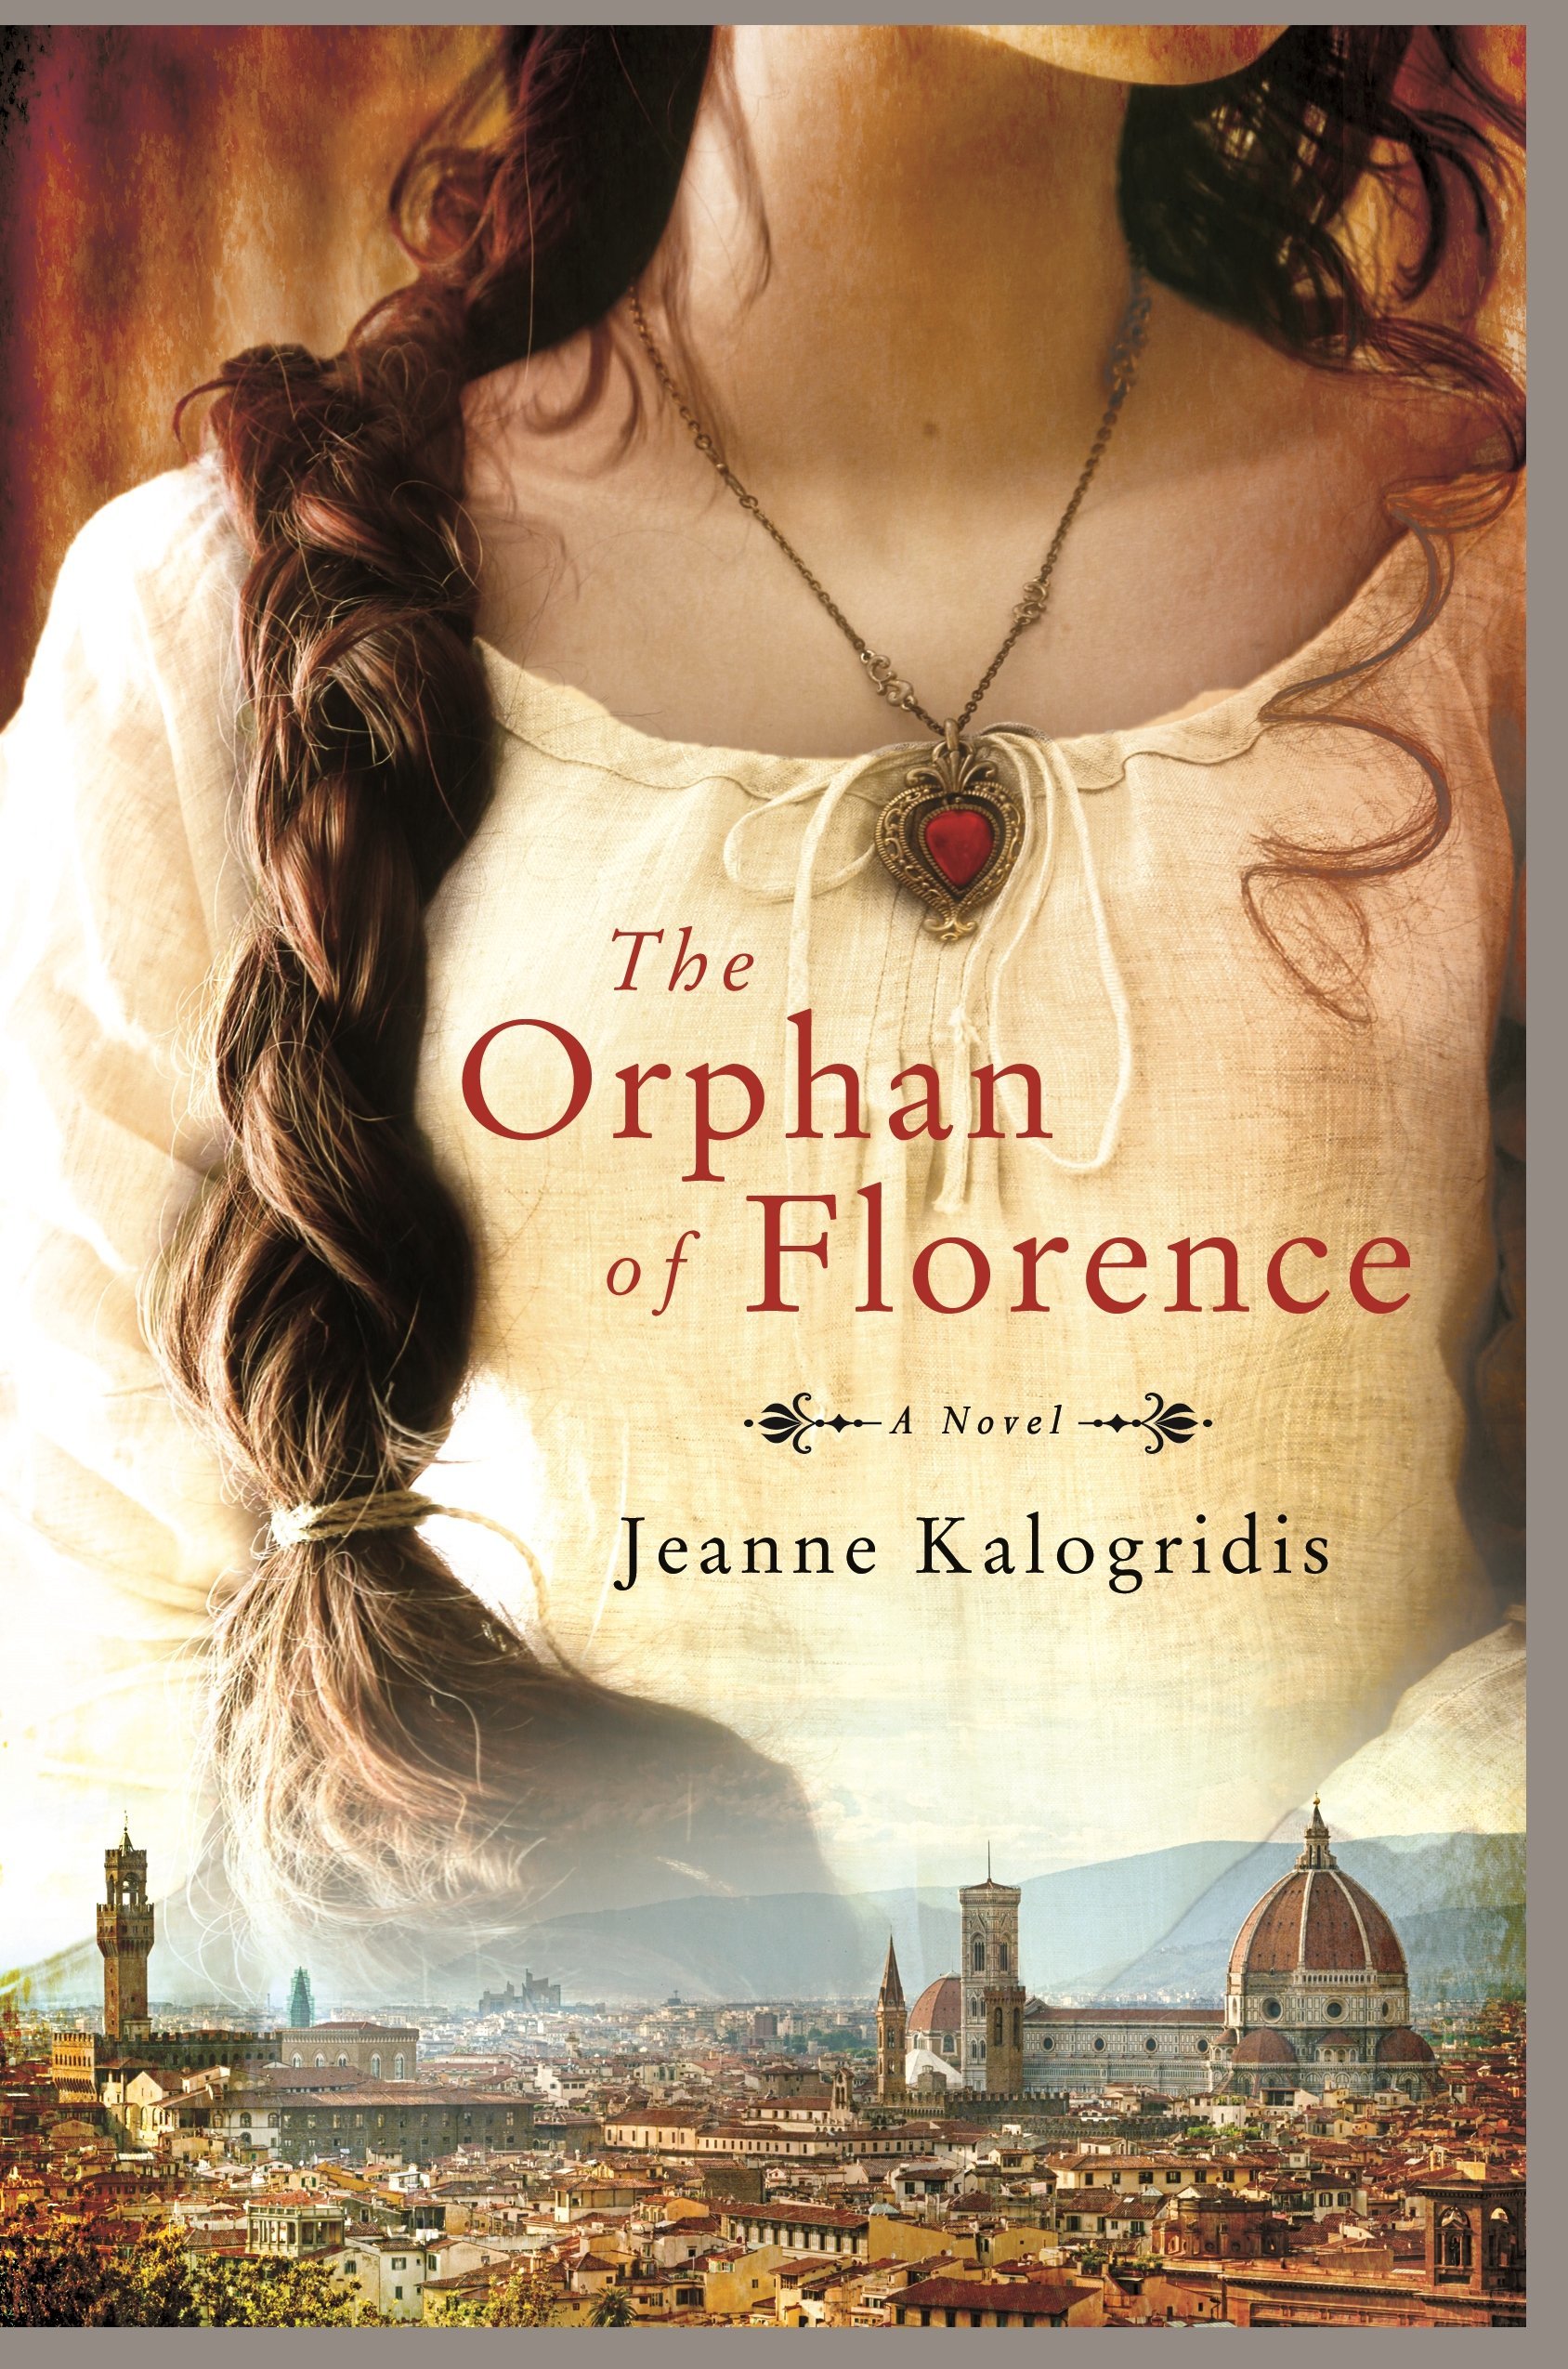 The Orphan of Florence: A Novel